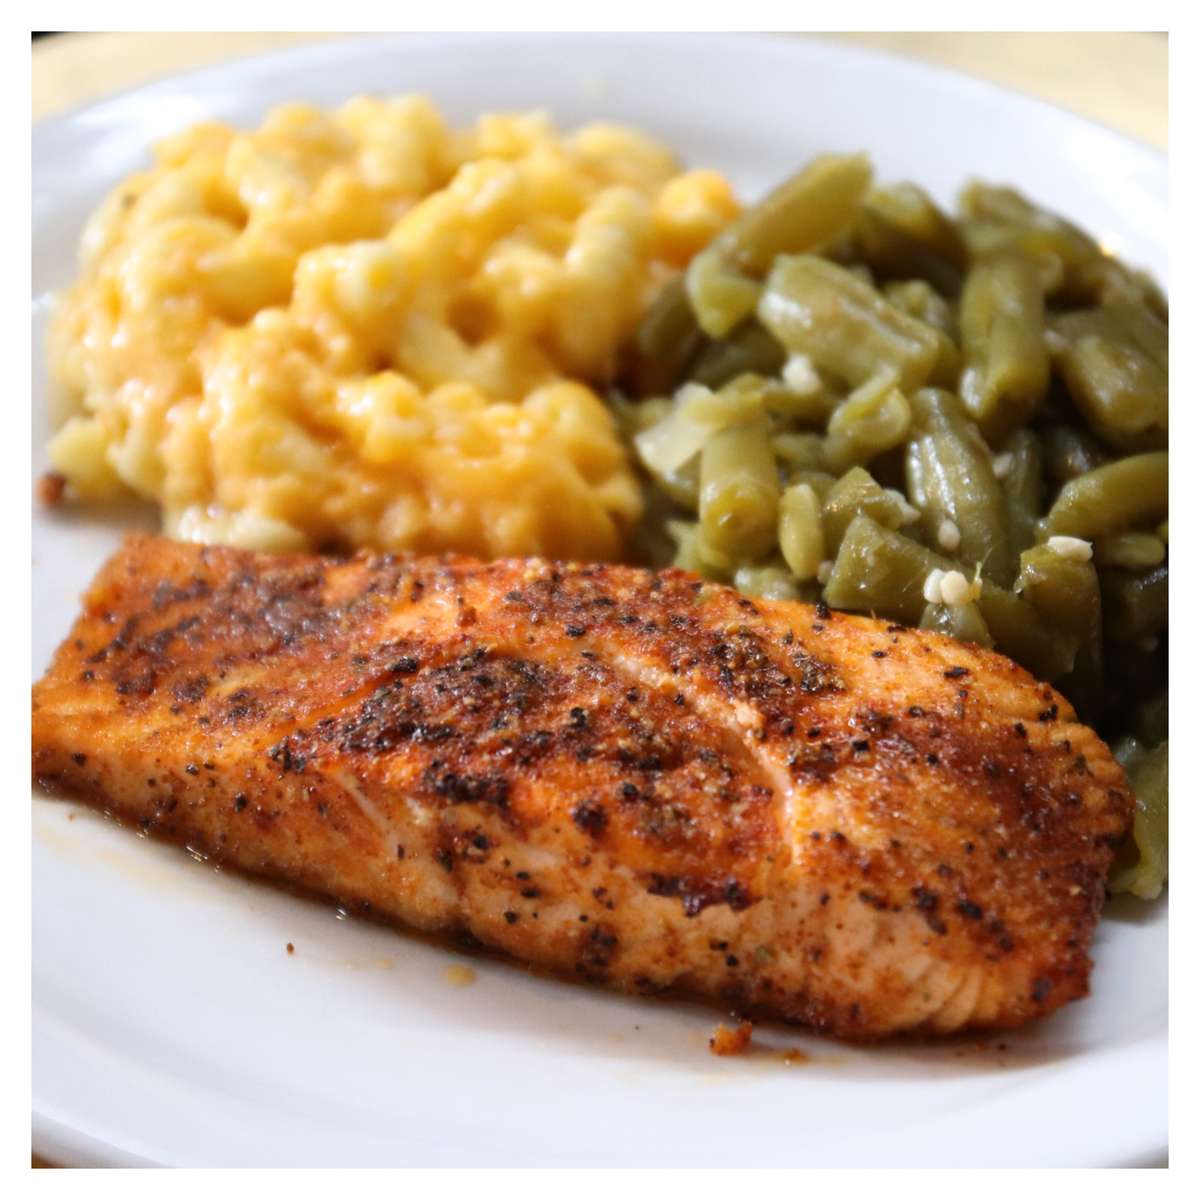 baked salmon plate